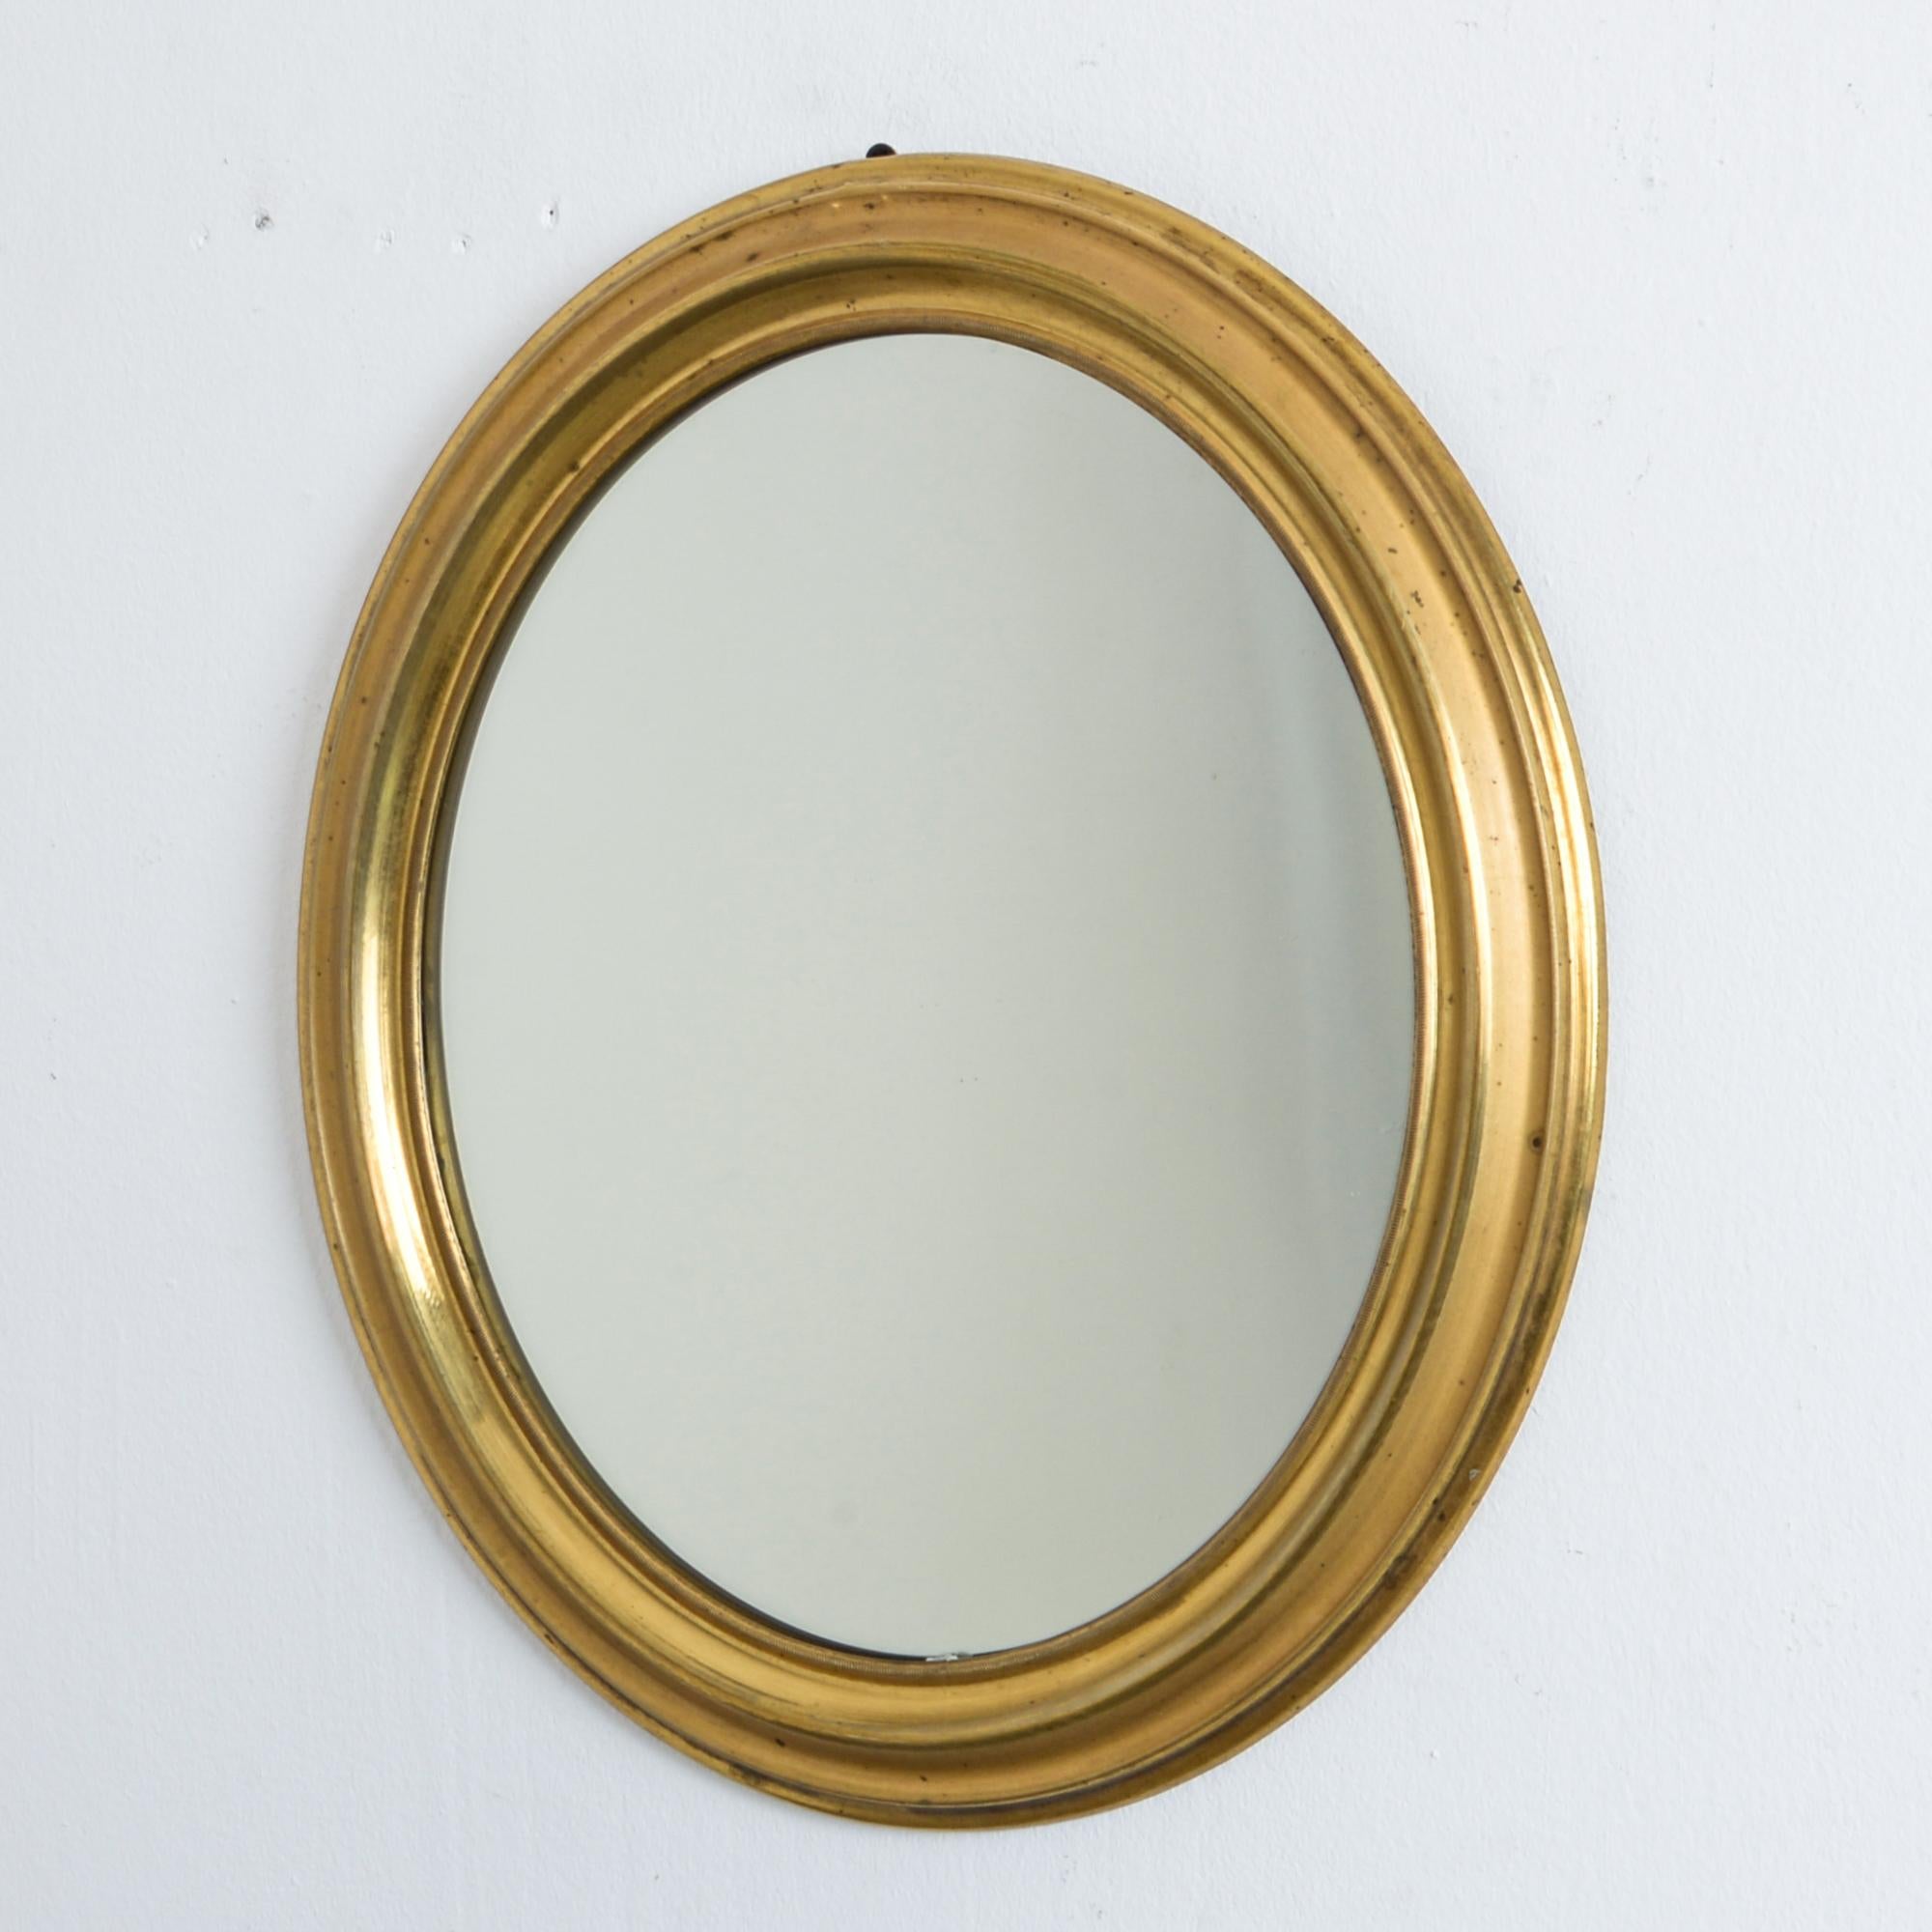 From France circa 1880. An oval brass mirror, in Napoleon III style. All original details, and a simple and dynamic form brings stylish French eclecticism and rustic European style to your space. These mirrors are made by beating a sheet or strip of